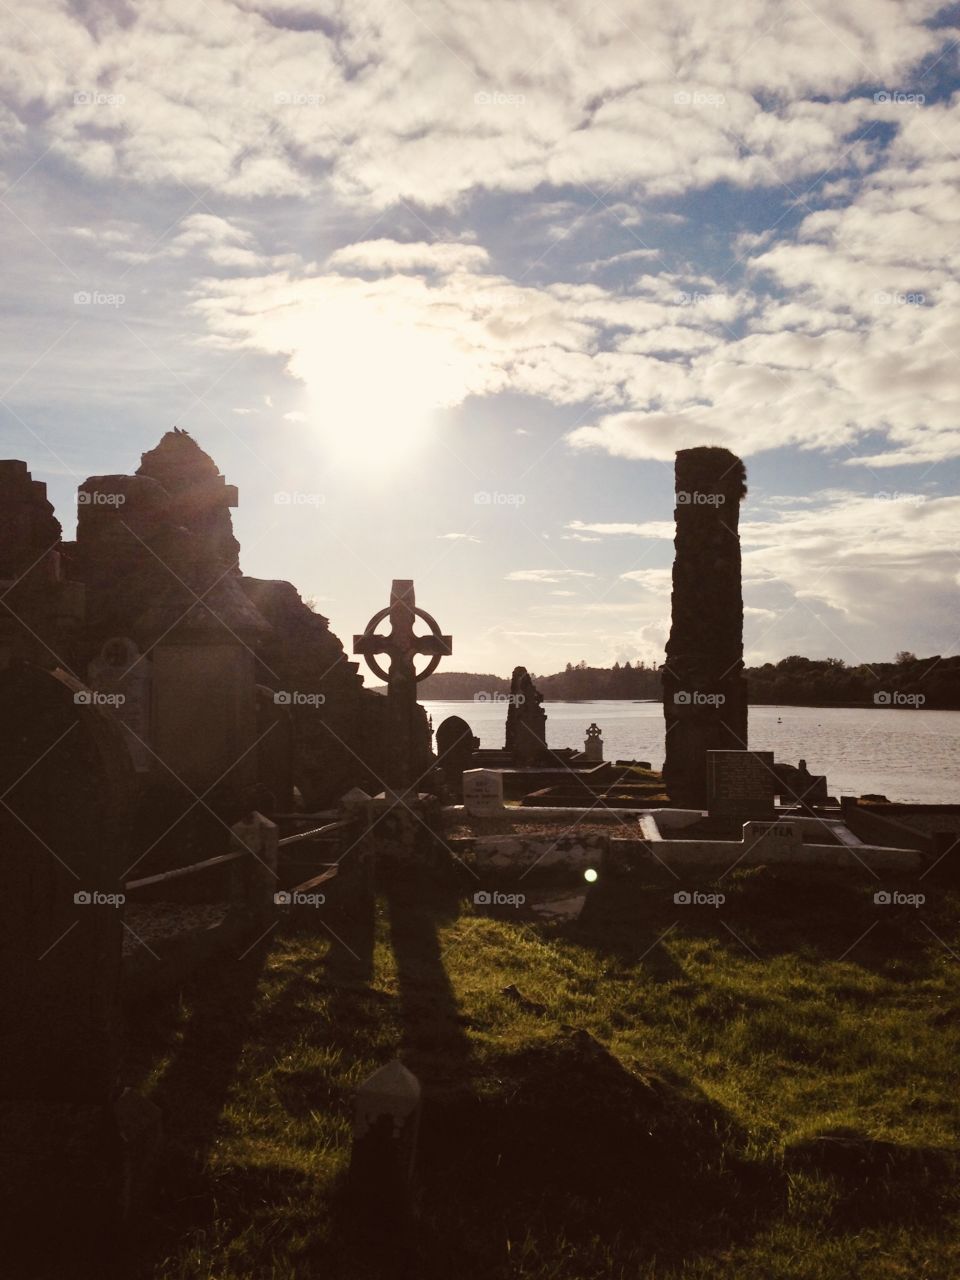 Cemetery in Donegal, Ireland